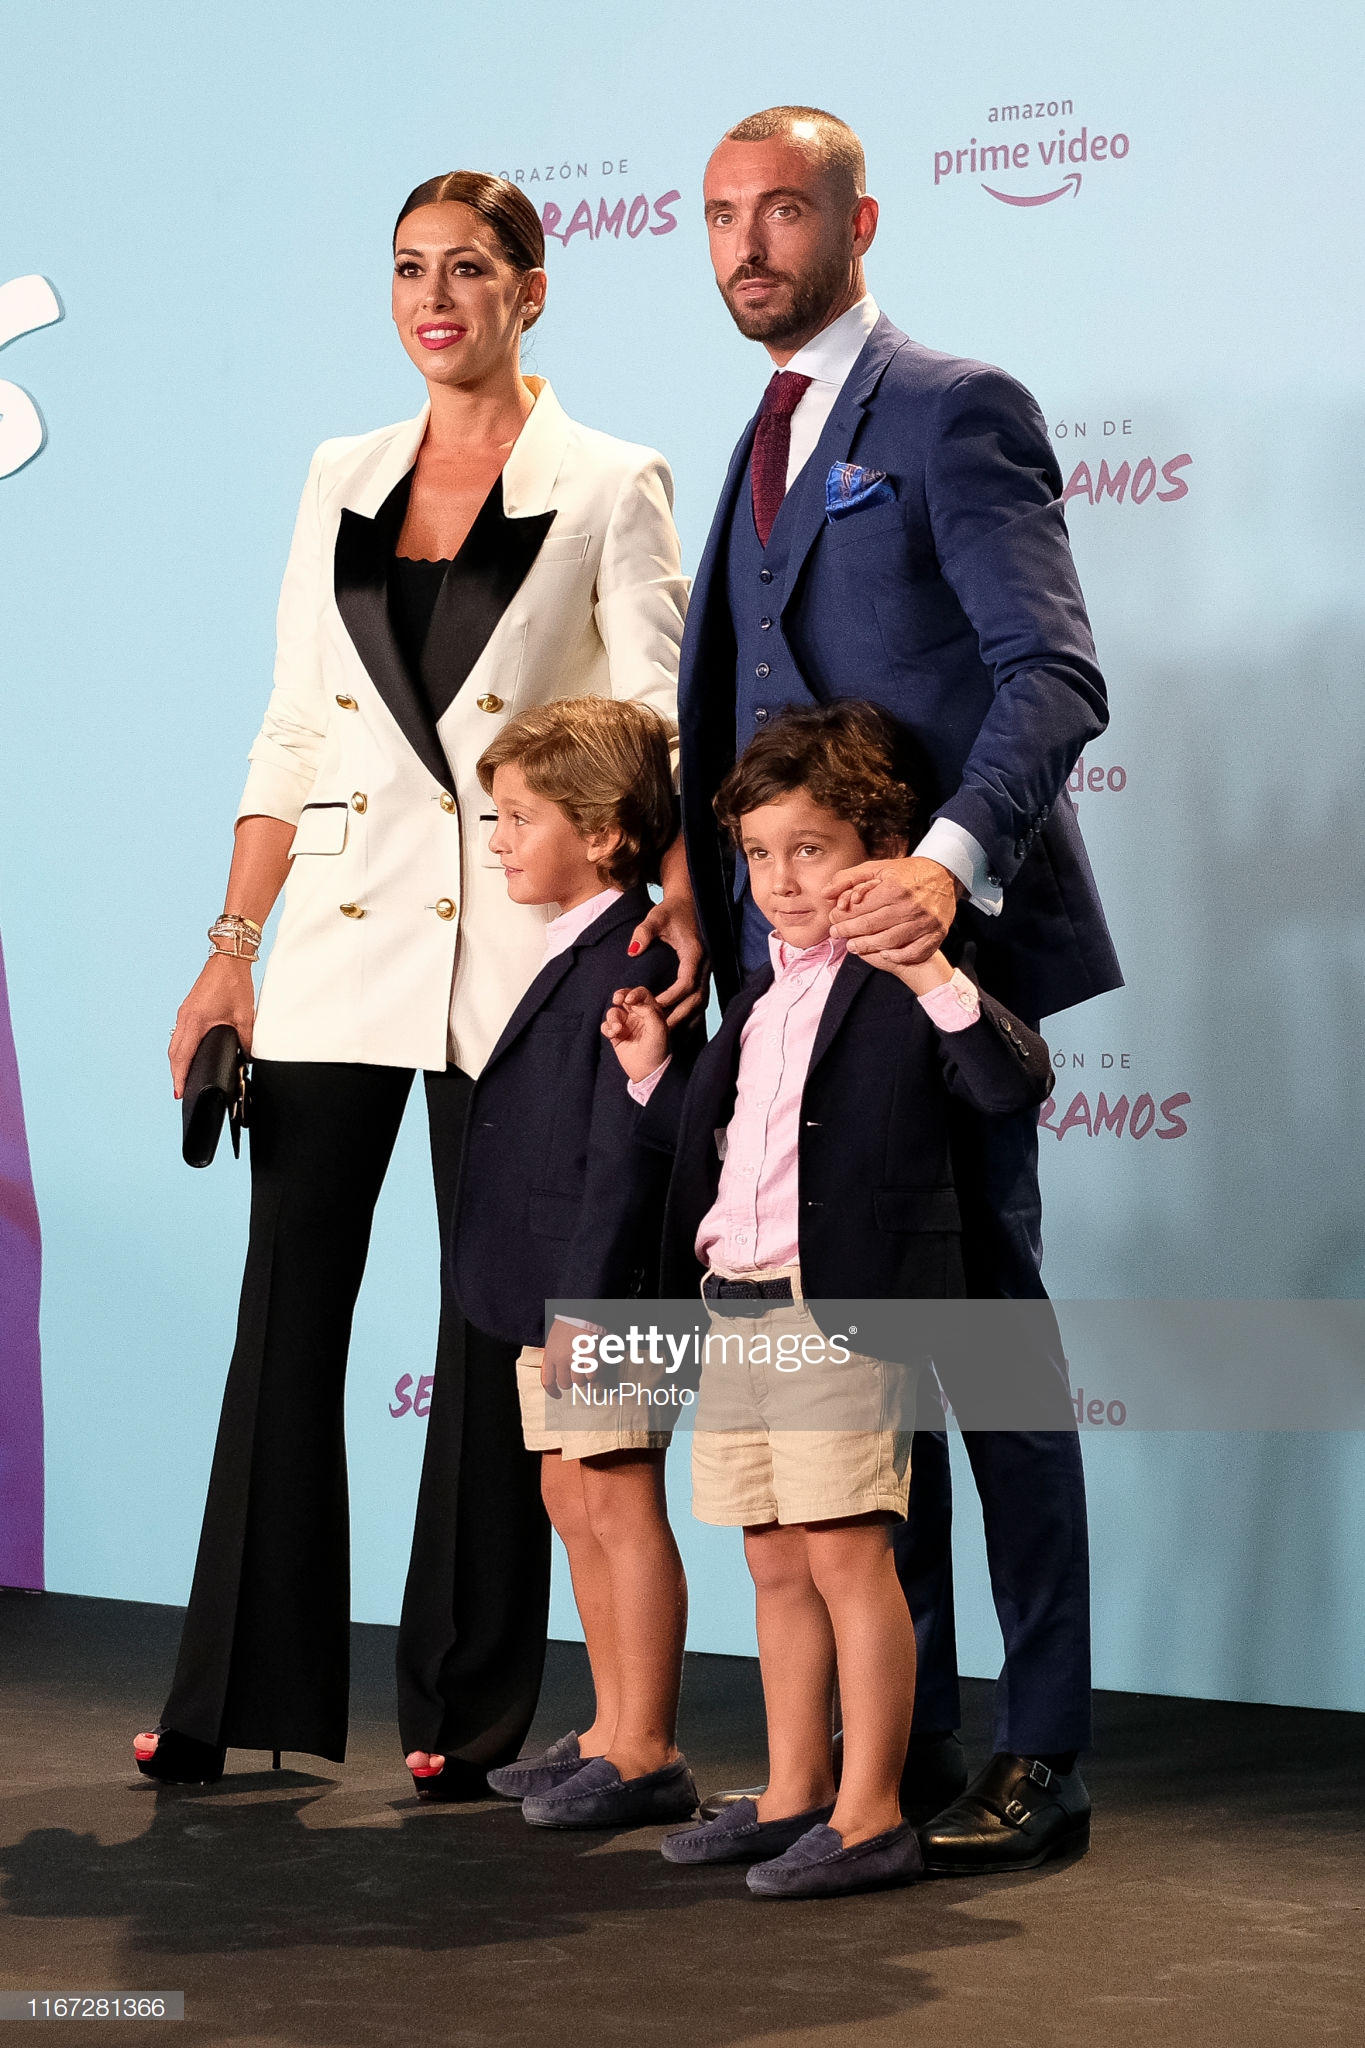 gettyimages-1167281366-2048x2048.jpg